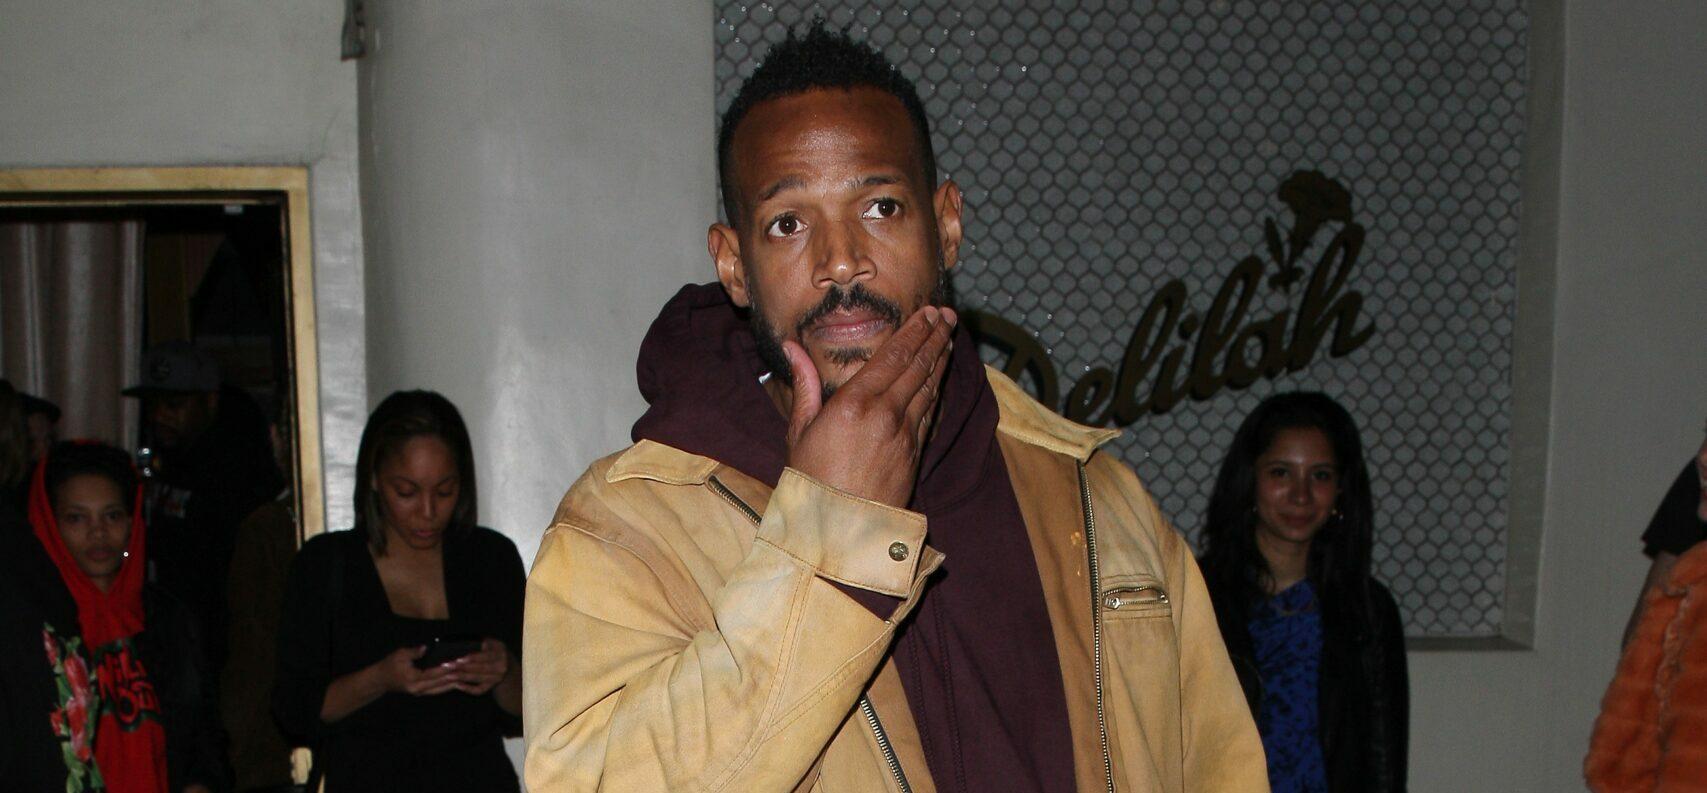 Actor Marlon Wayans is spotted leaving the Delilah restaurant